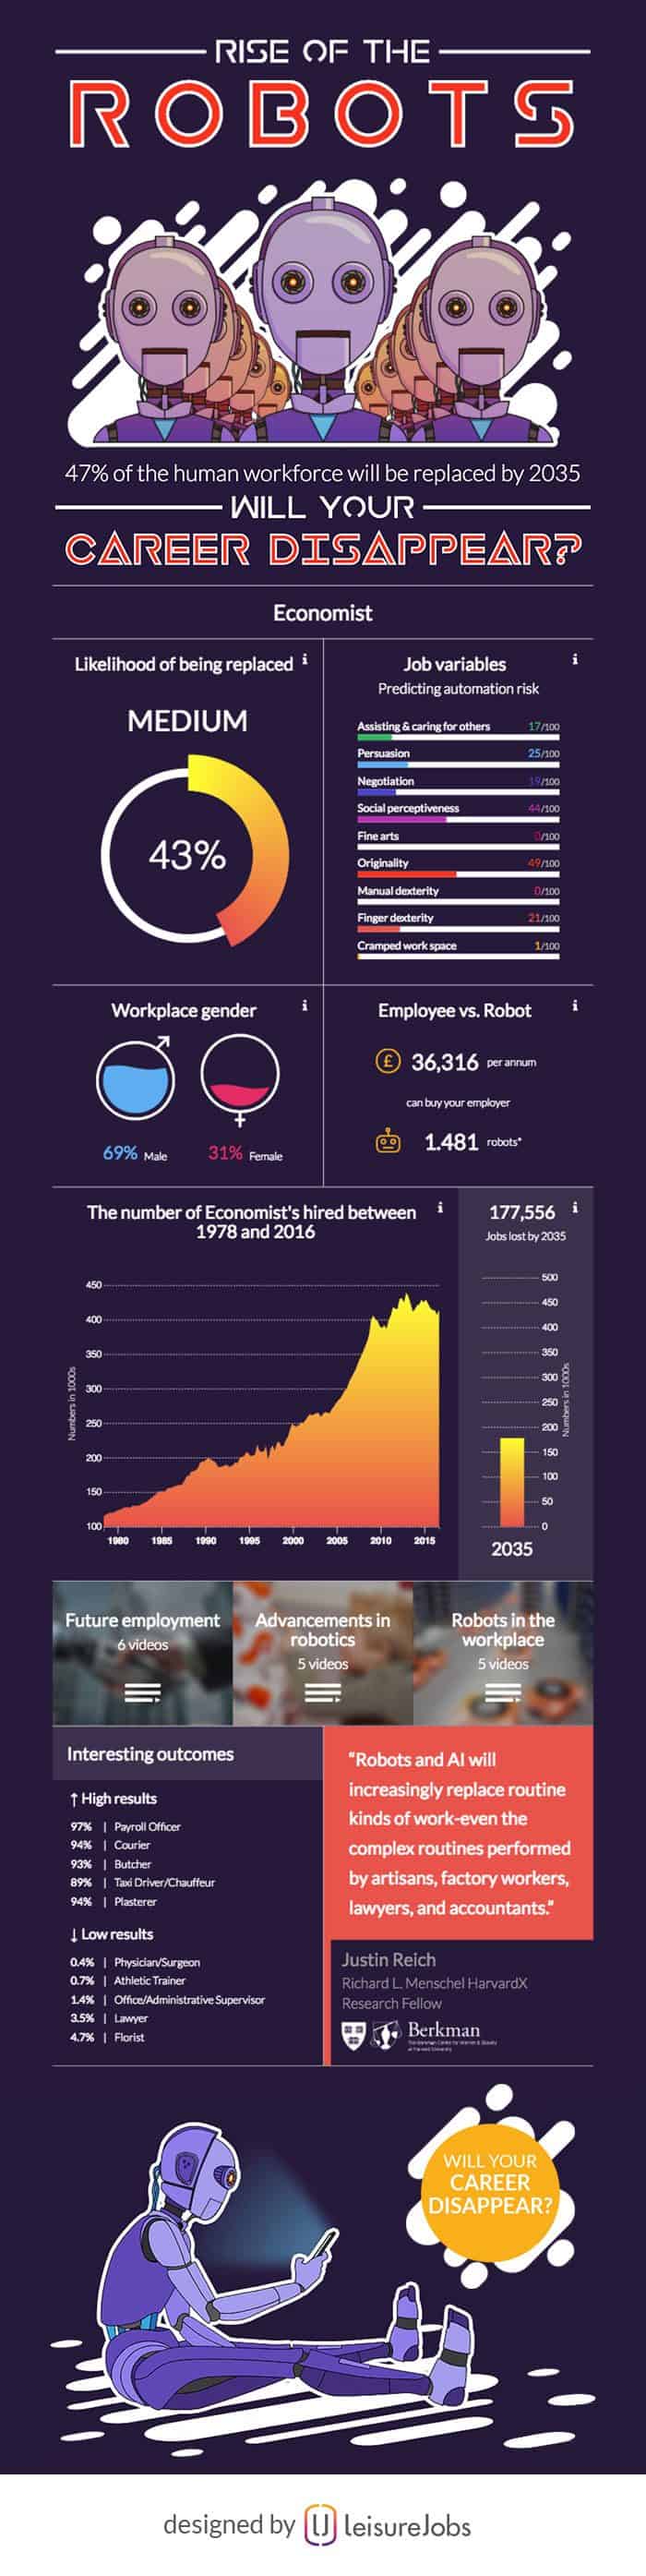 infographic describes the rise of robots and automated technology and how it could affect careers